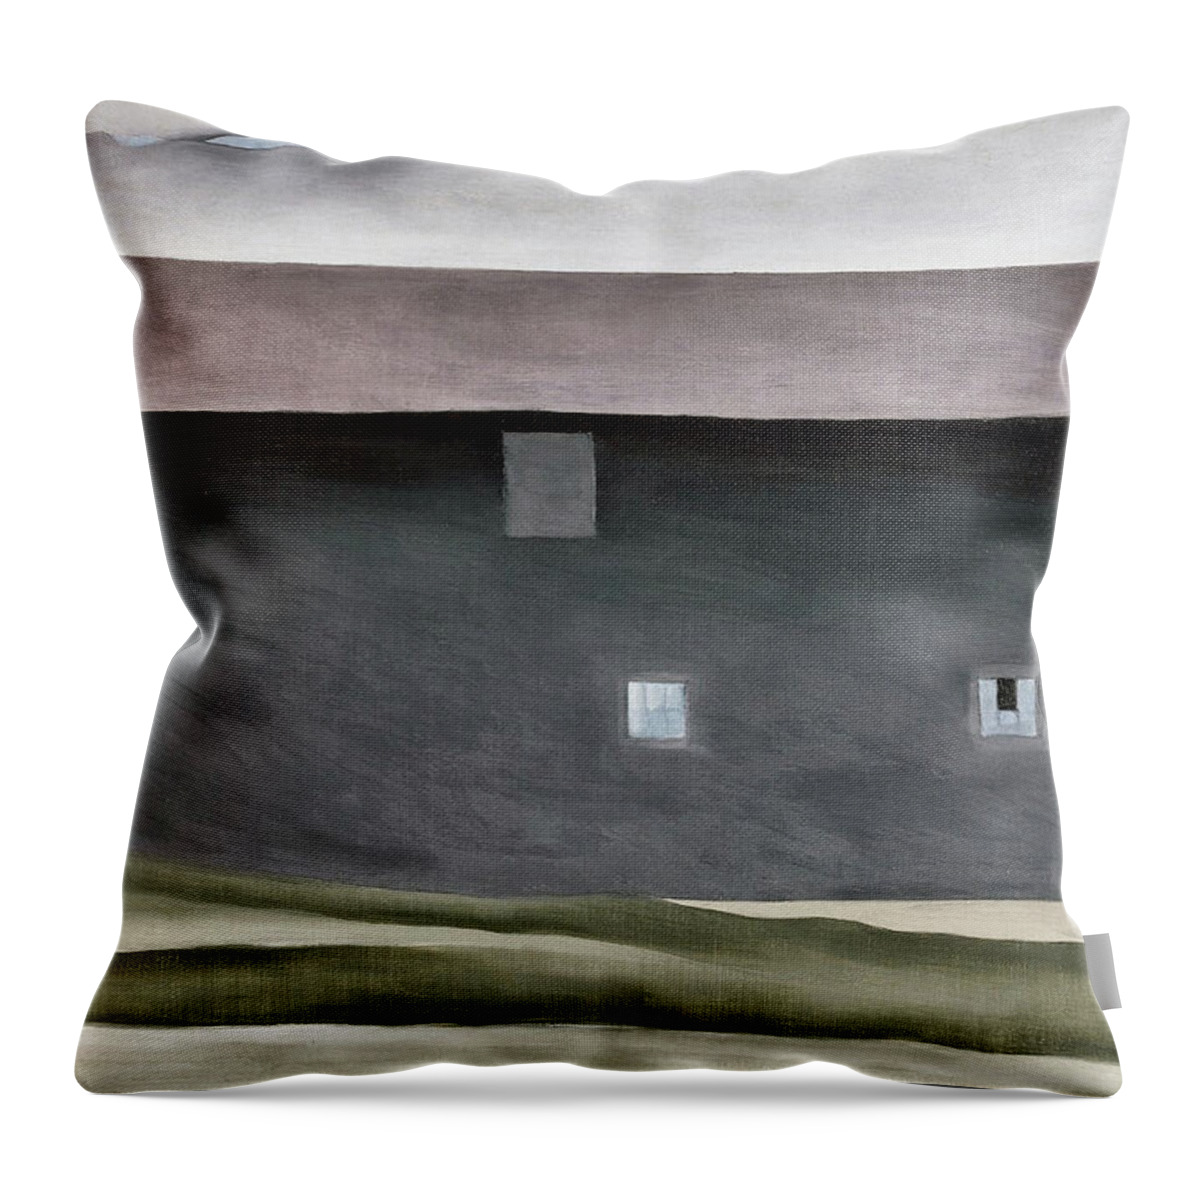 Georgia O'keeffe Throw Pillow featuring the painting Lake George Barns - modernist village view painting by Georgia O'Keeffe